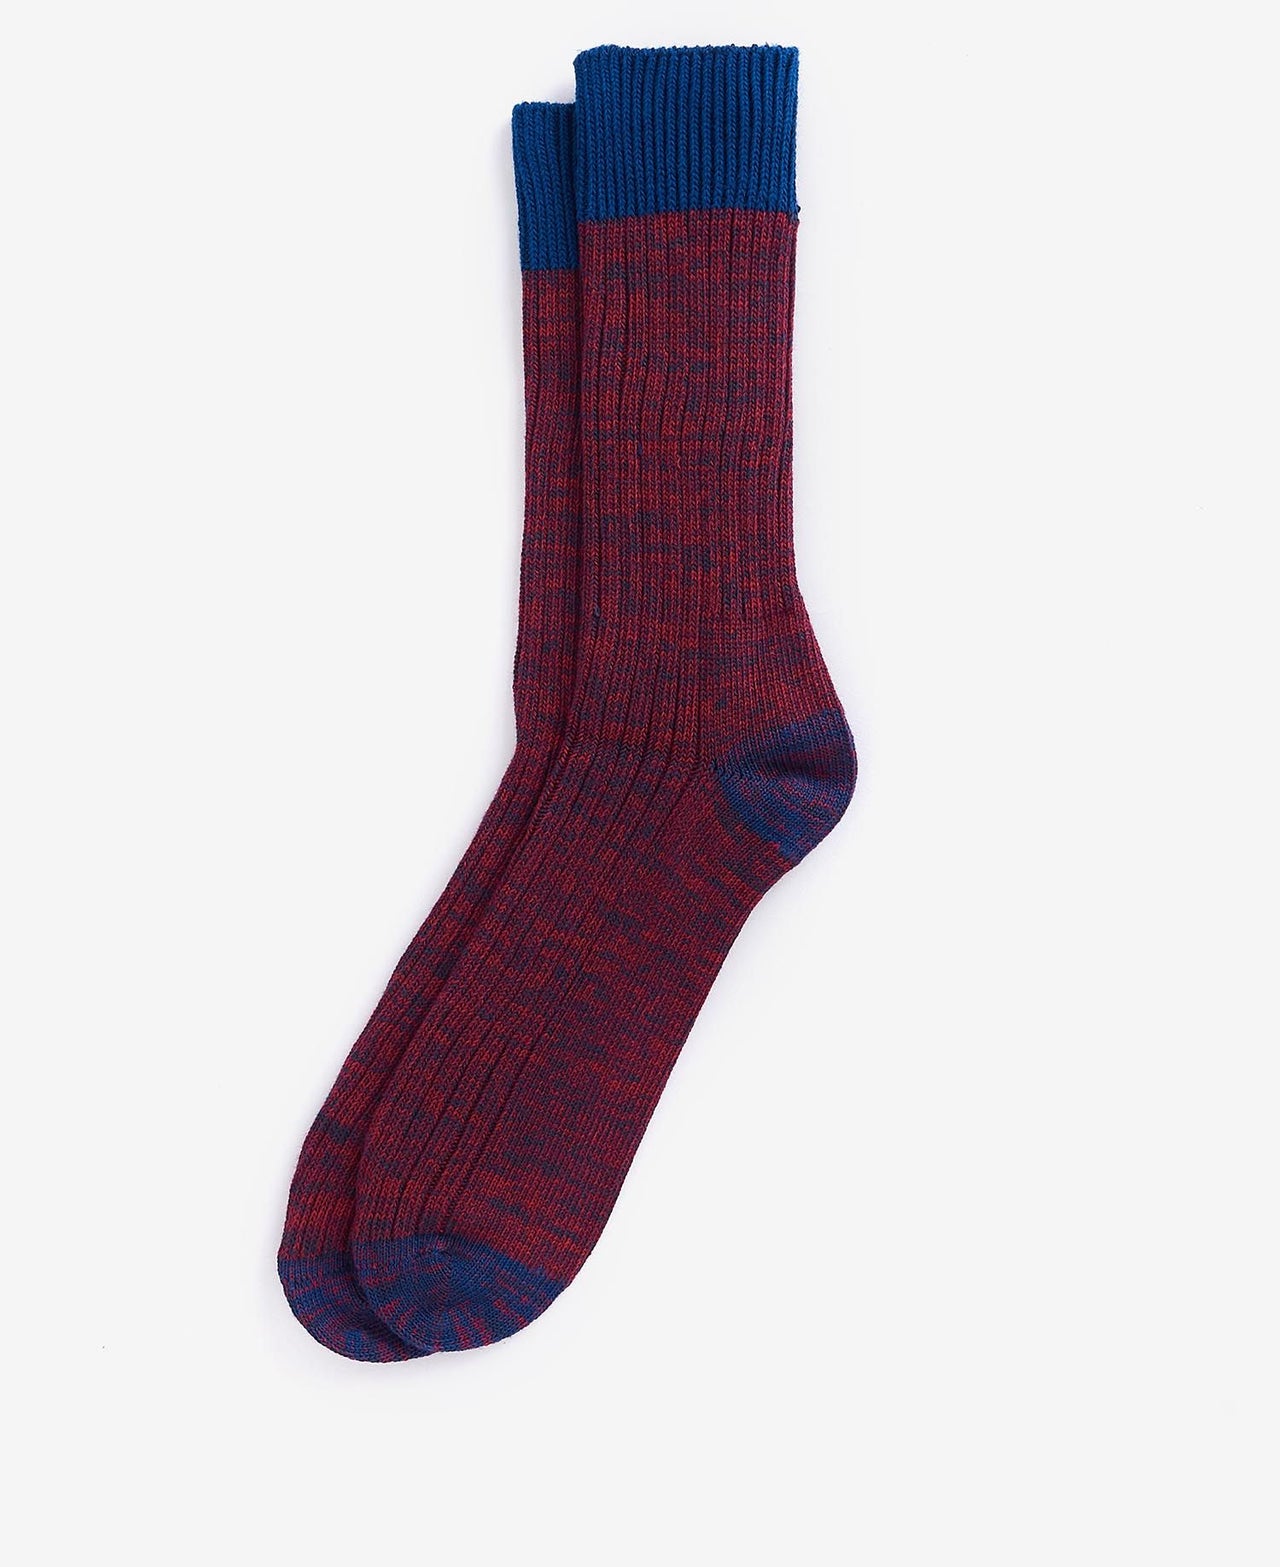 Barbour Twisted Contrast Socks - Cranberry